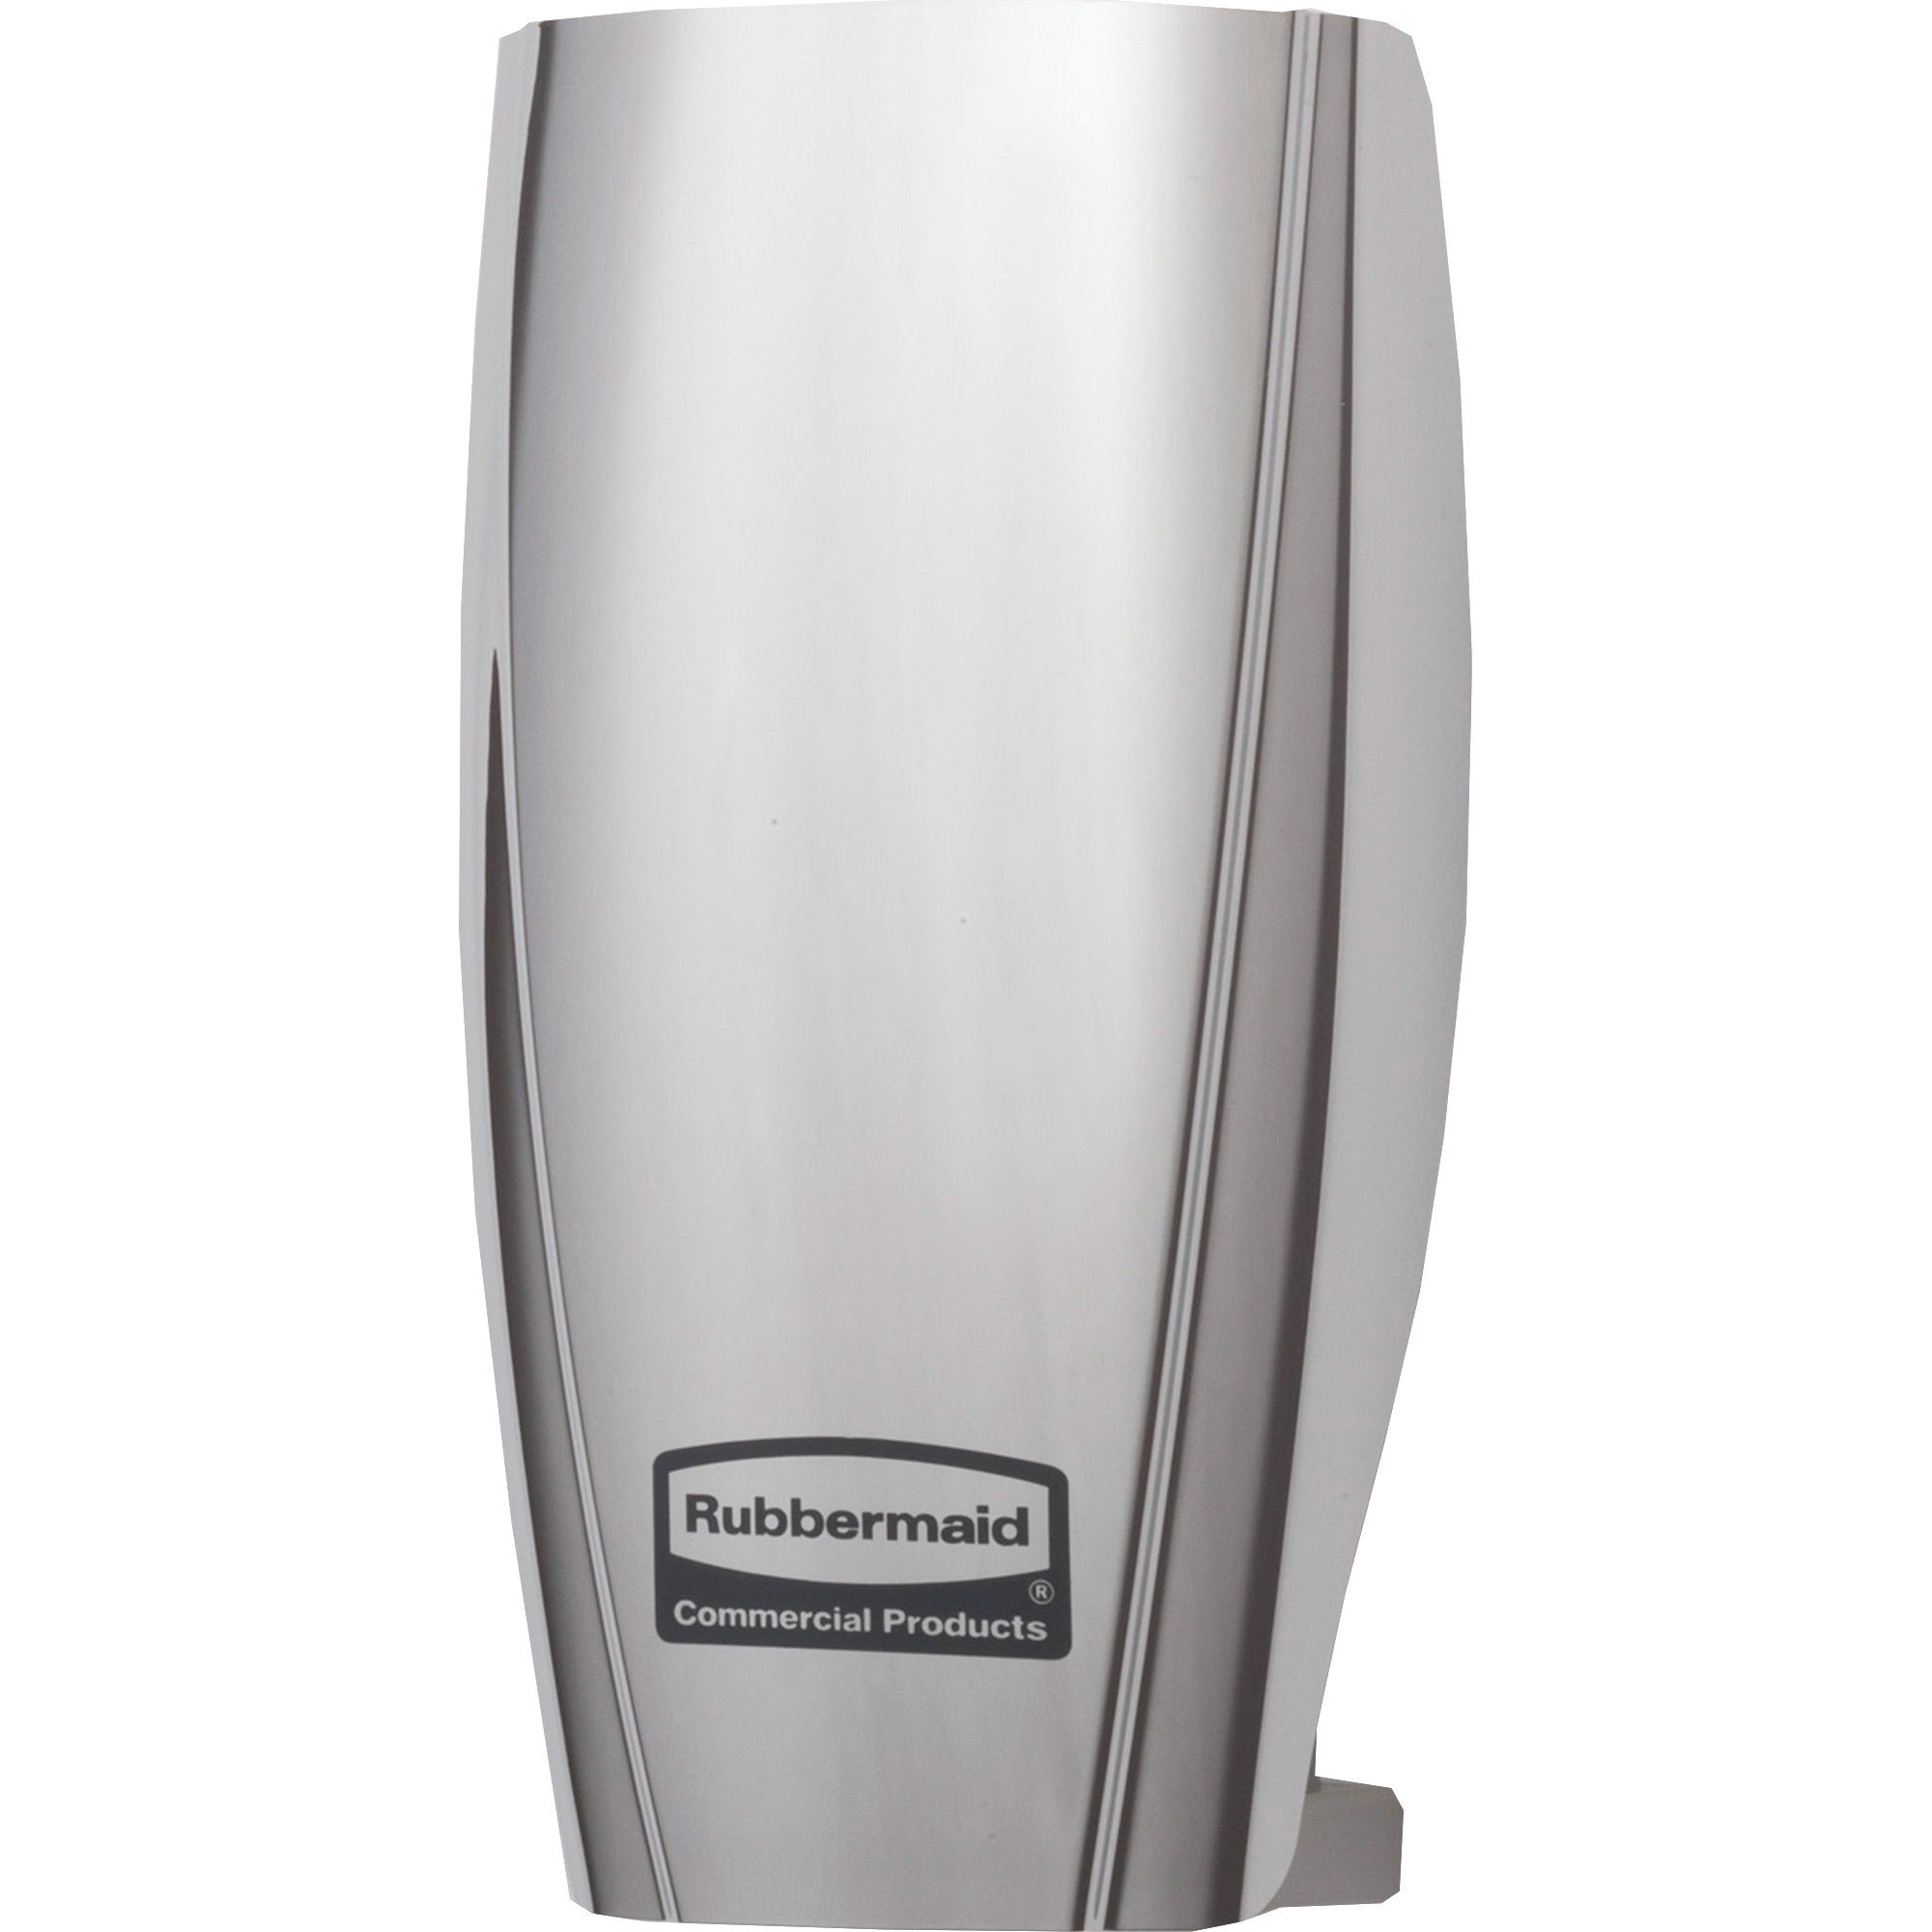 Rubbermaid Commercial TCell Air Freshening Dispenser - 90 Day Refill Life - 6000 ft Coverage - 12 / Carton - Chrome